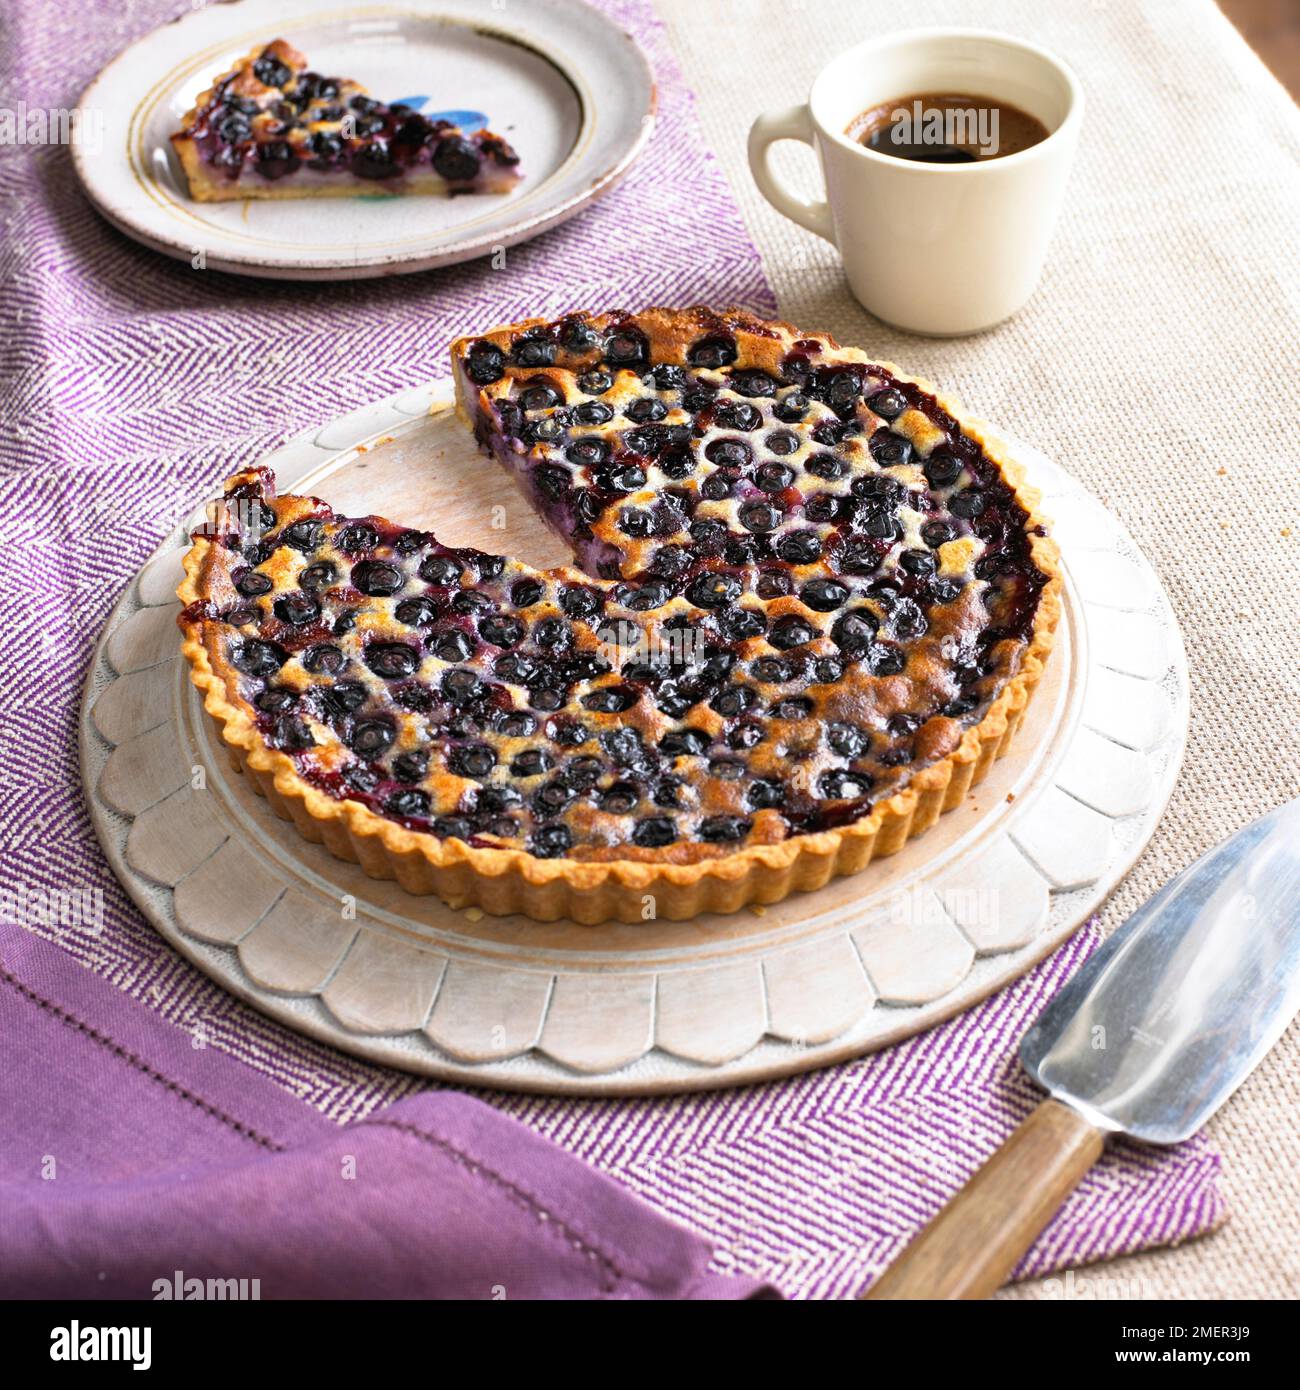 Blueberry cream cheese tart with slice removed, cake server, coffee cup and slice on plate nearby Stock Photo